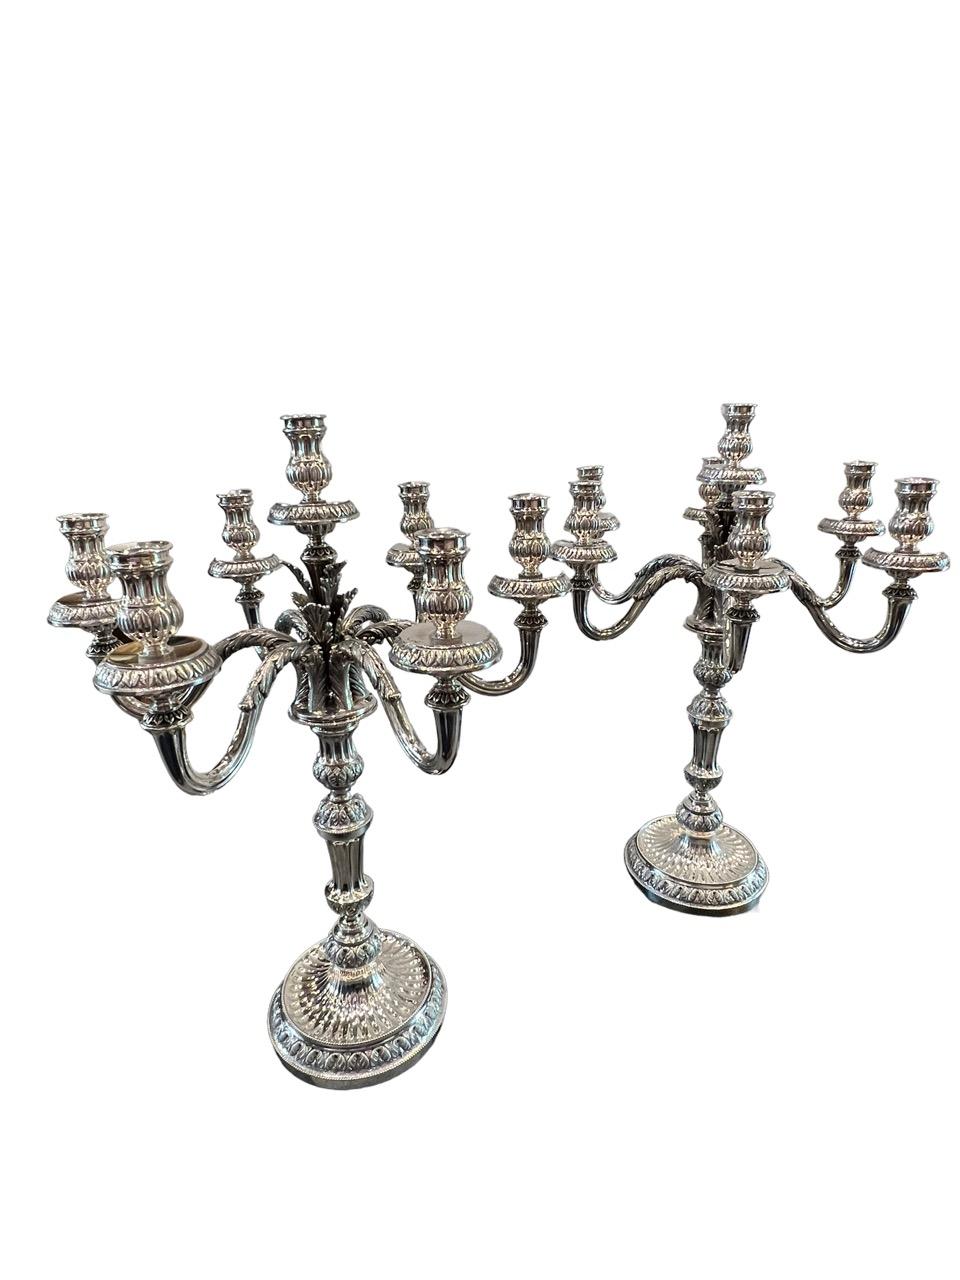 1910 Italian Pair of Sterling Silver Candelabras, Tall and Heavy In Fair Condition For Sale In North Miami, FL